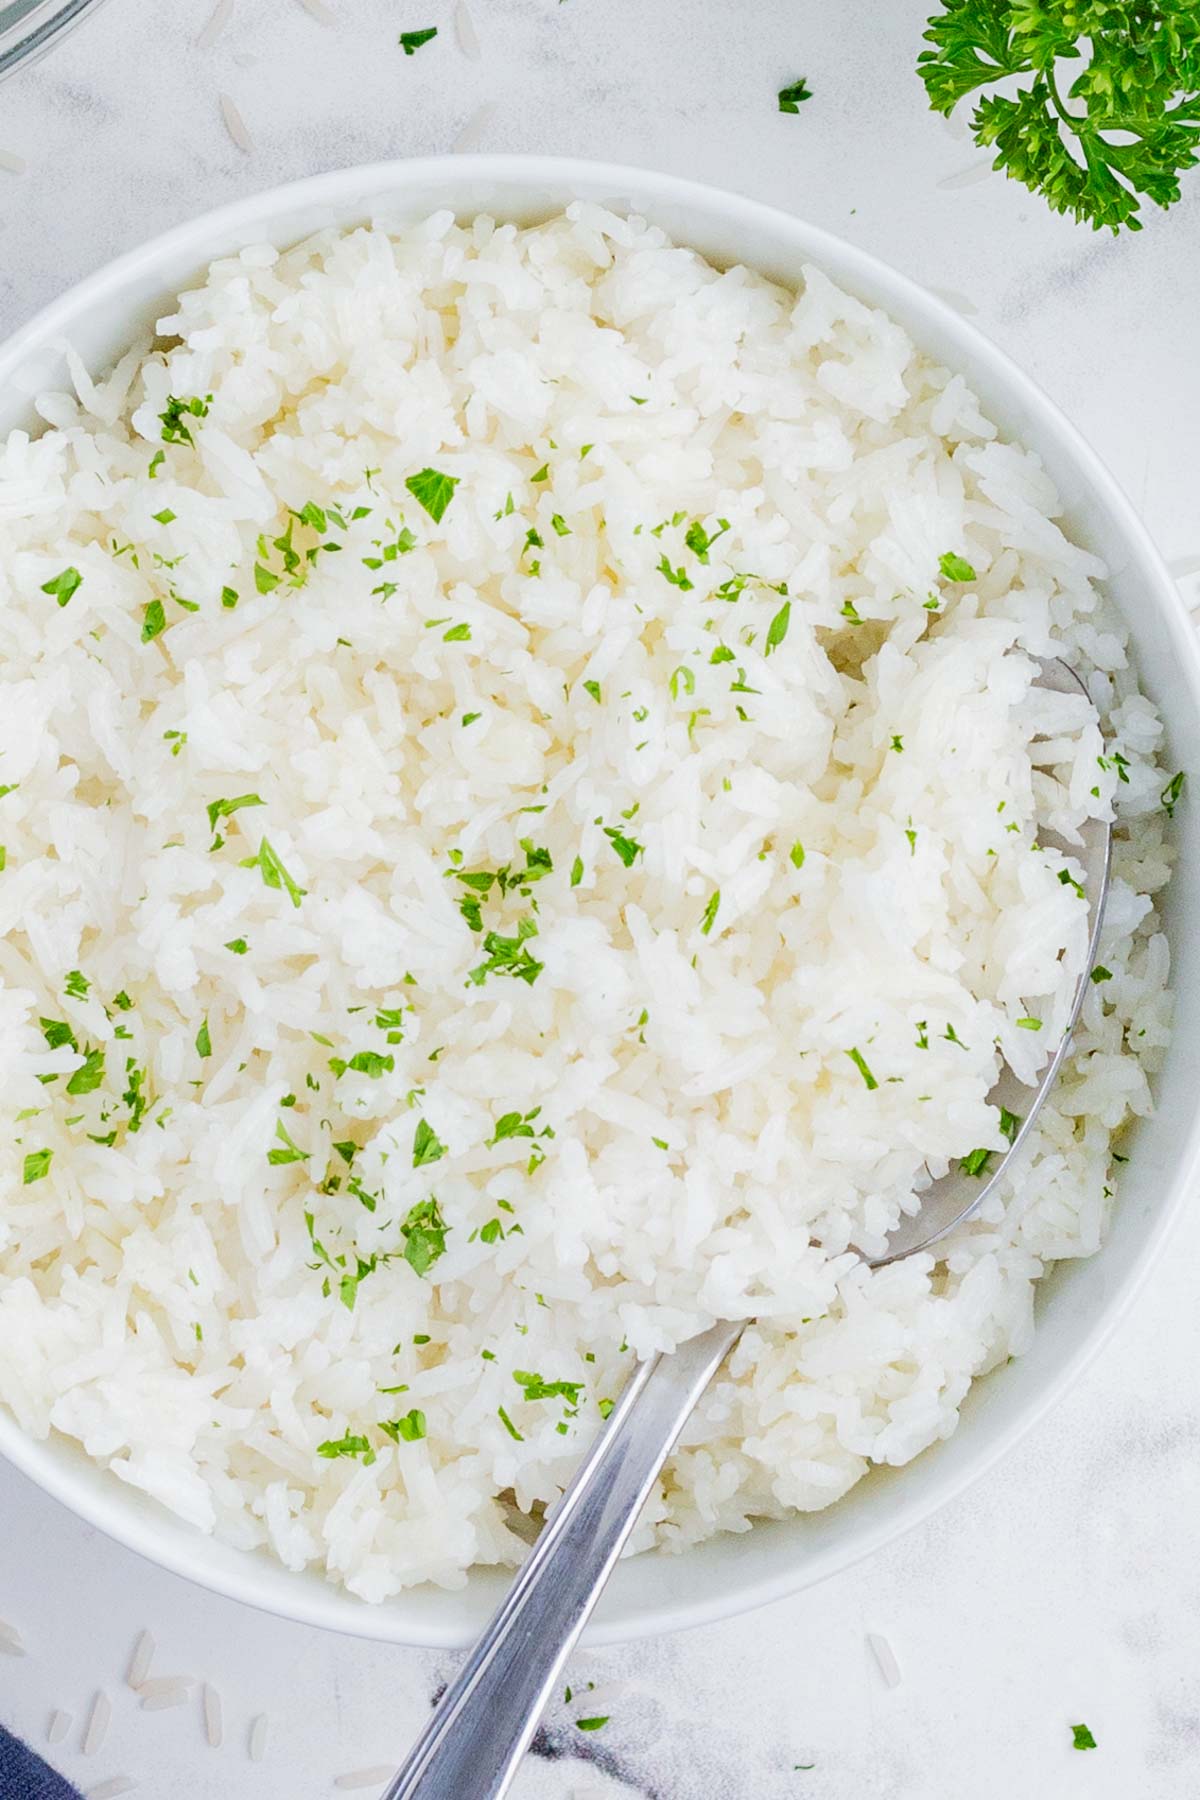 An overhead view of cooked rice seasoned with fresh herbs.